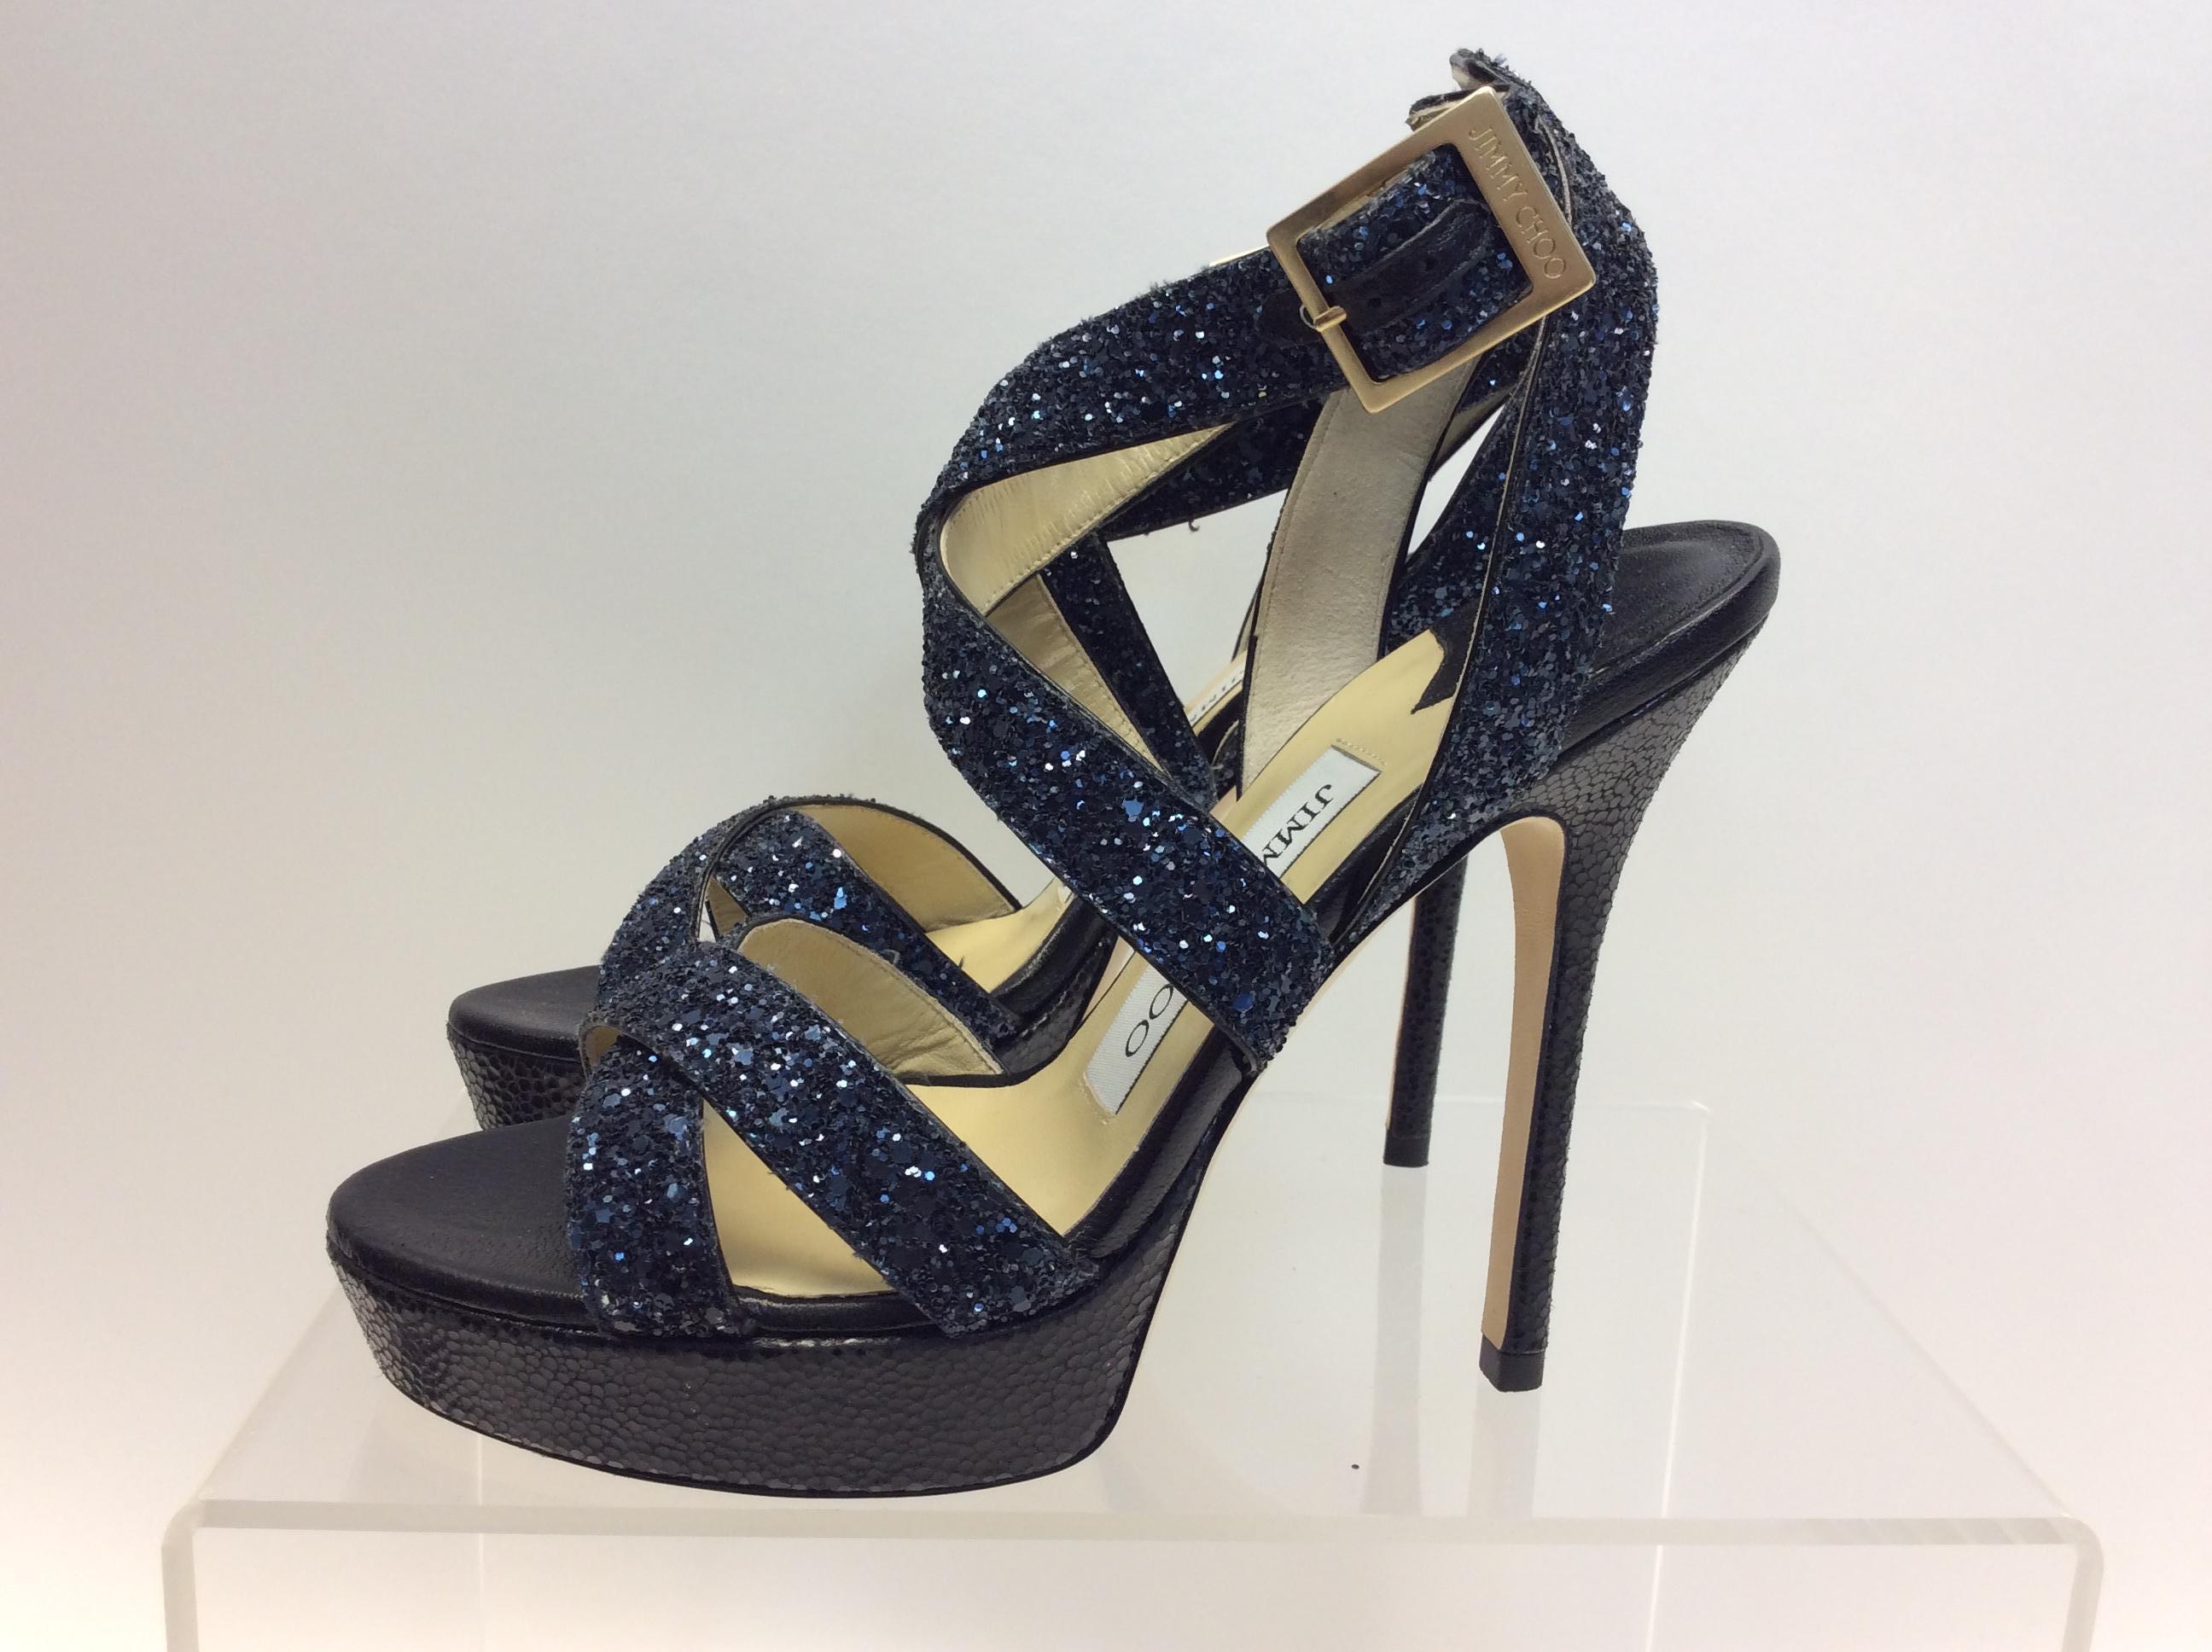 Jimmy Choo Blue Beaded Strappy Sandal
$499
Made in Italy
Size 36
1” platform
5” heel